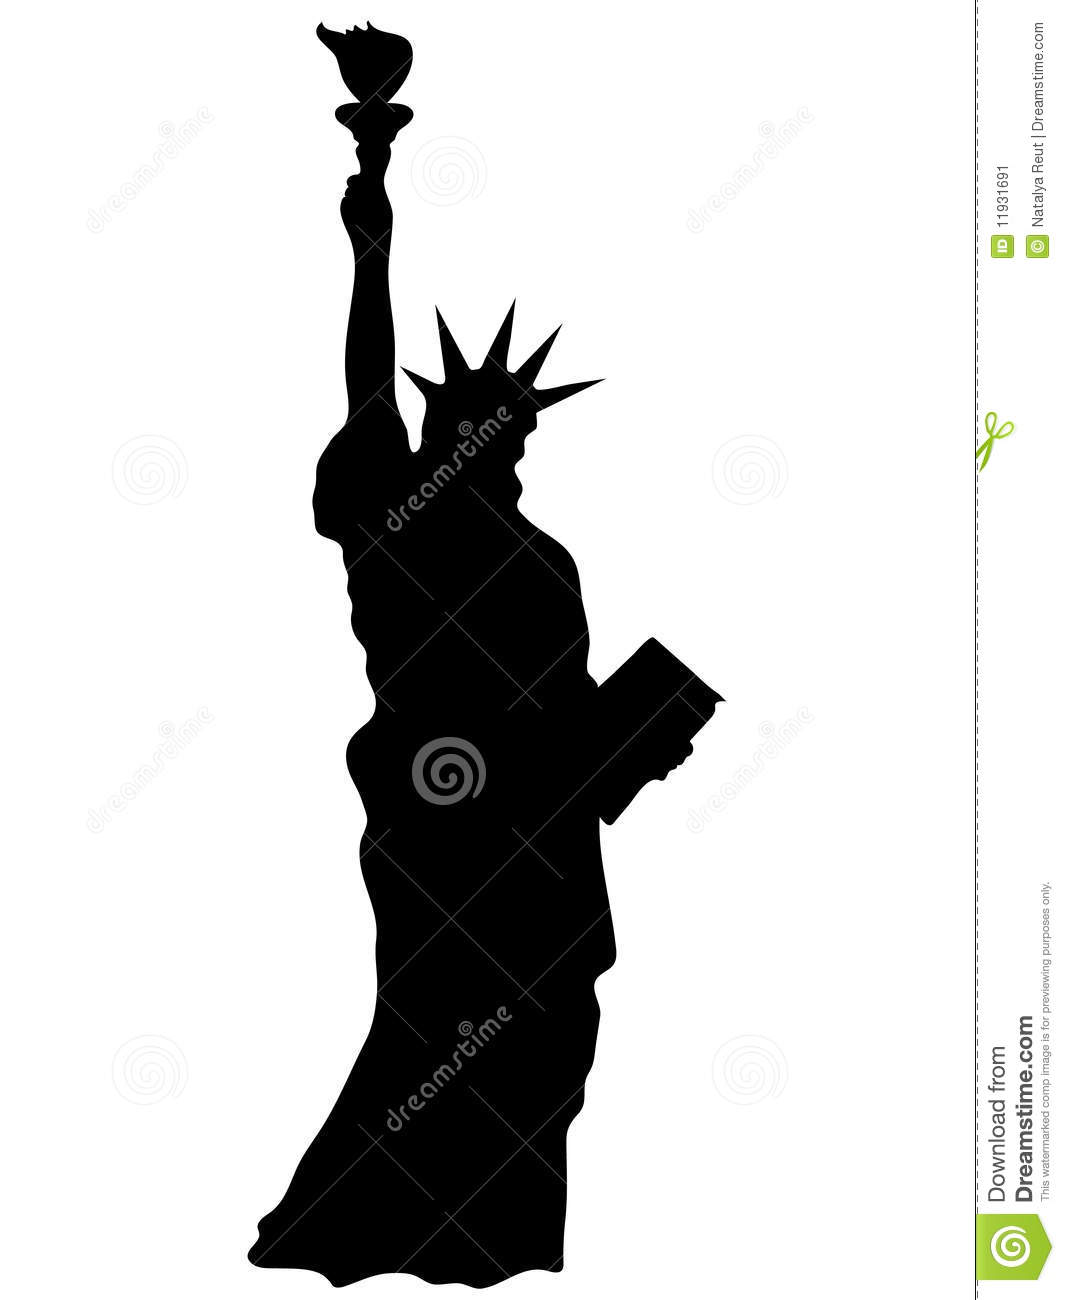 More Similar Stock Images Of   Statue Of Liberty Silhouette   